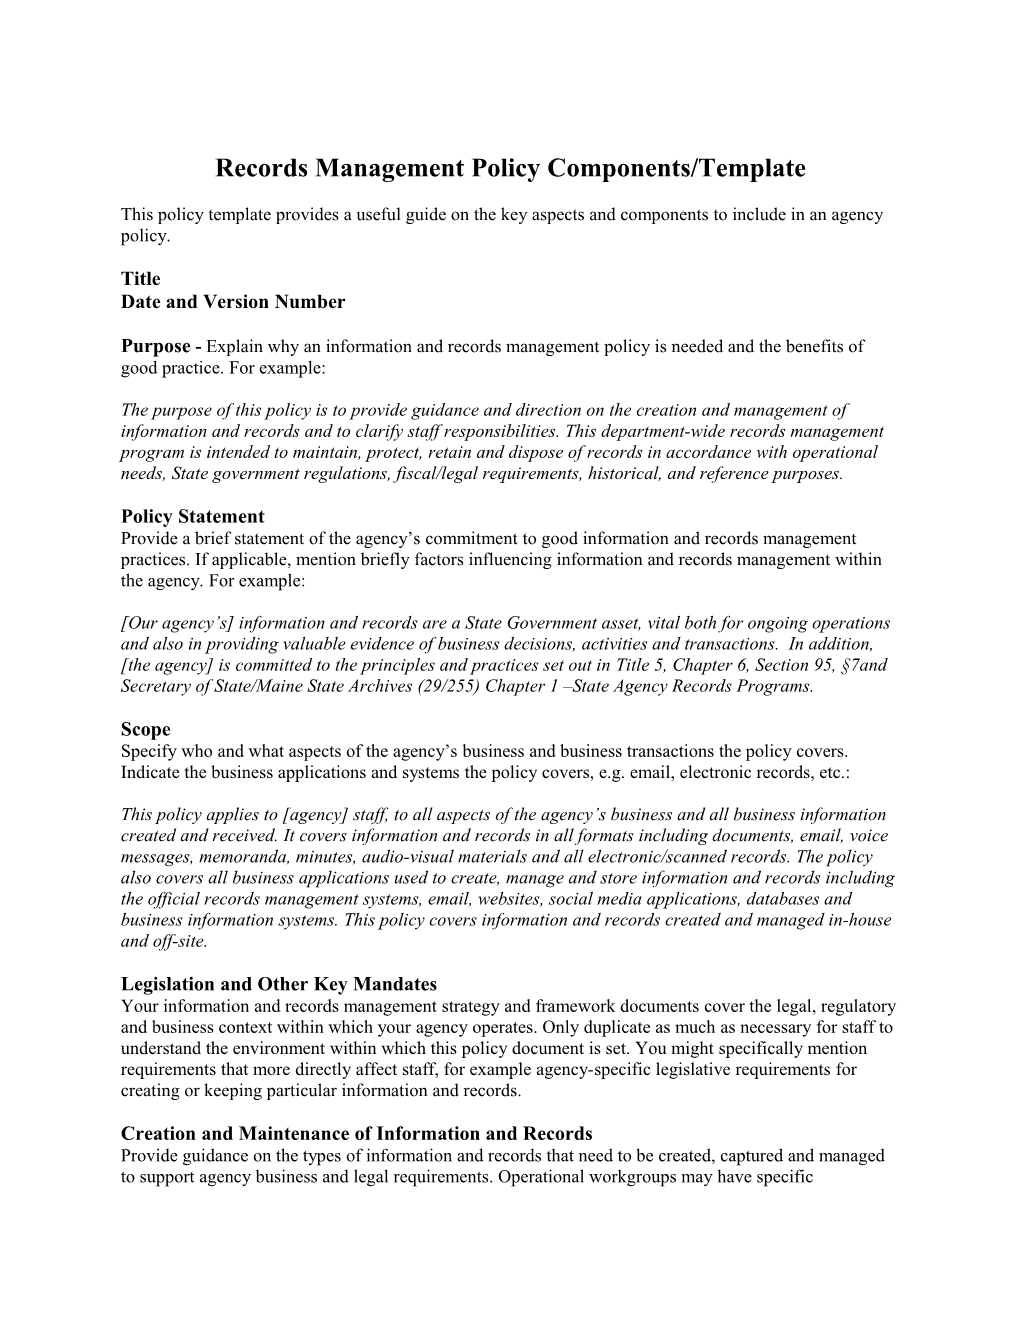 Creating a Records Management Policy